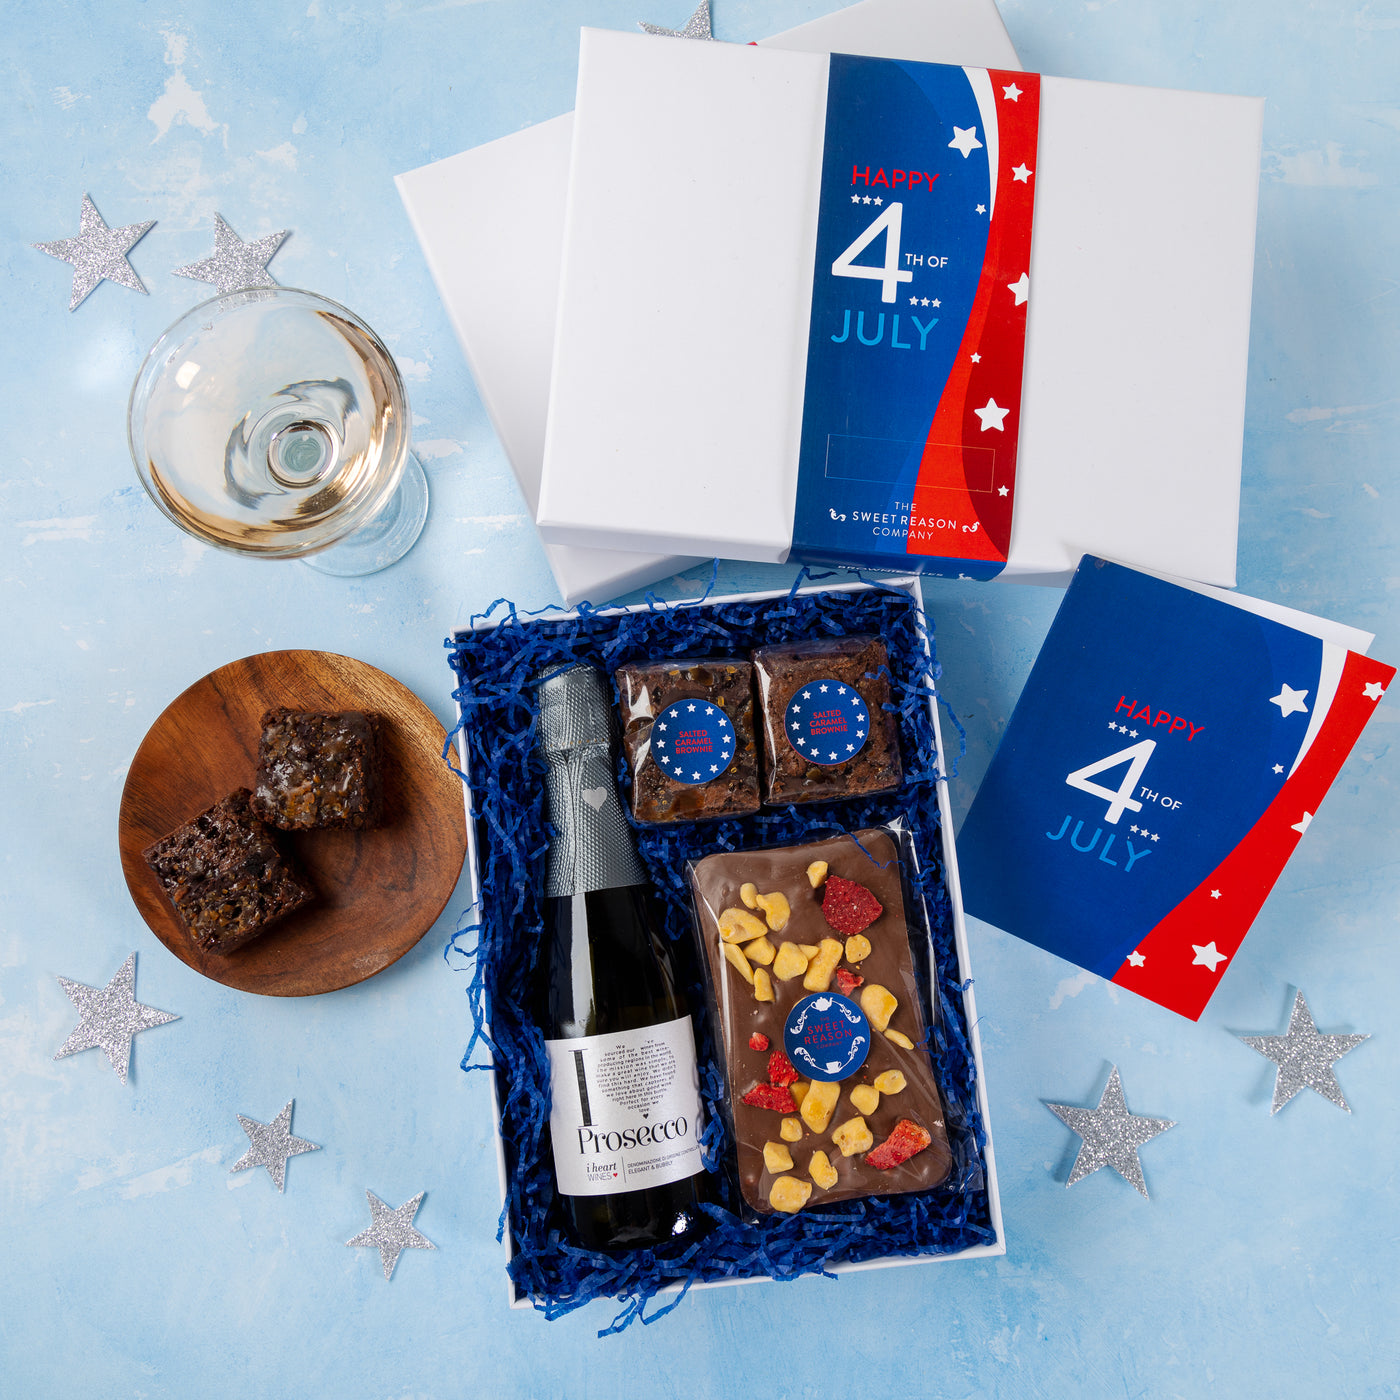 'Happy 4th of July' Chocolate Slab, Brownies and Prosecco